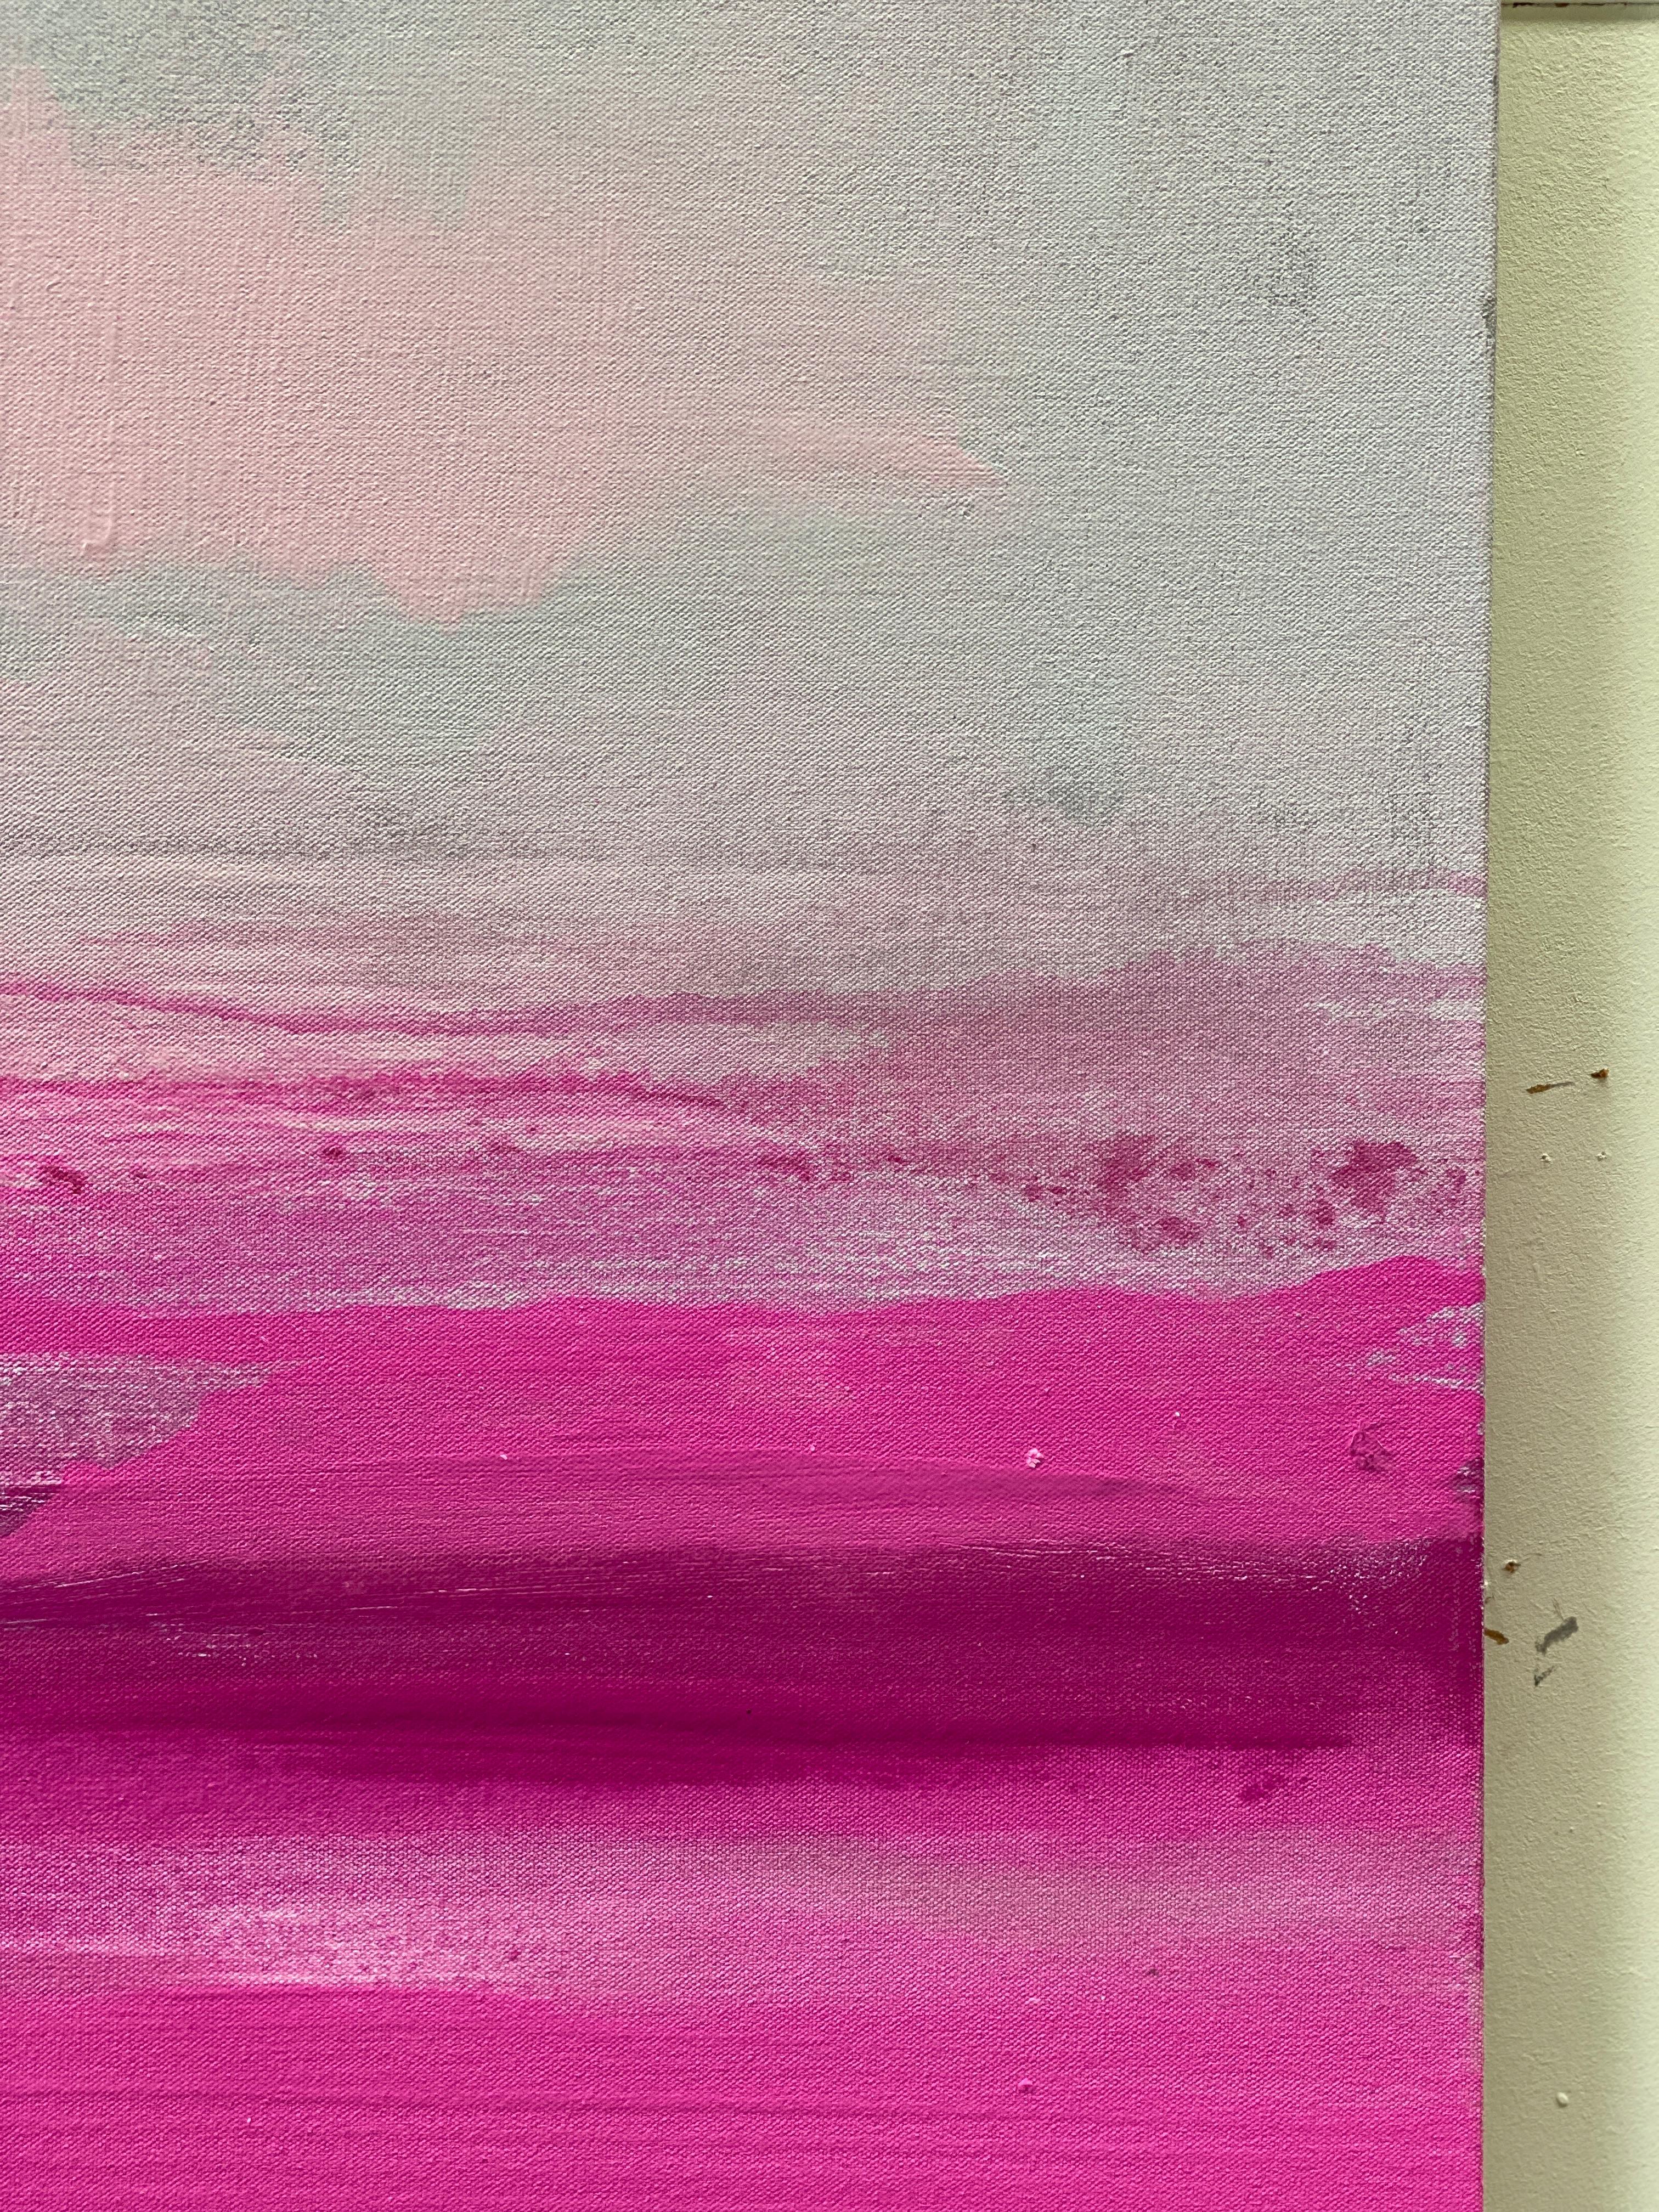 Elegance large abstract seascape on canvas in bright pink light grey white - Abstract Painting by Kathleen Rhee